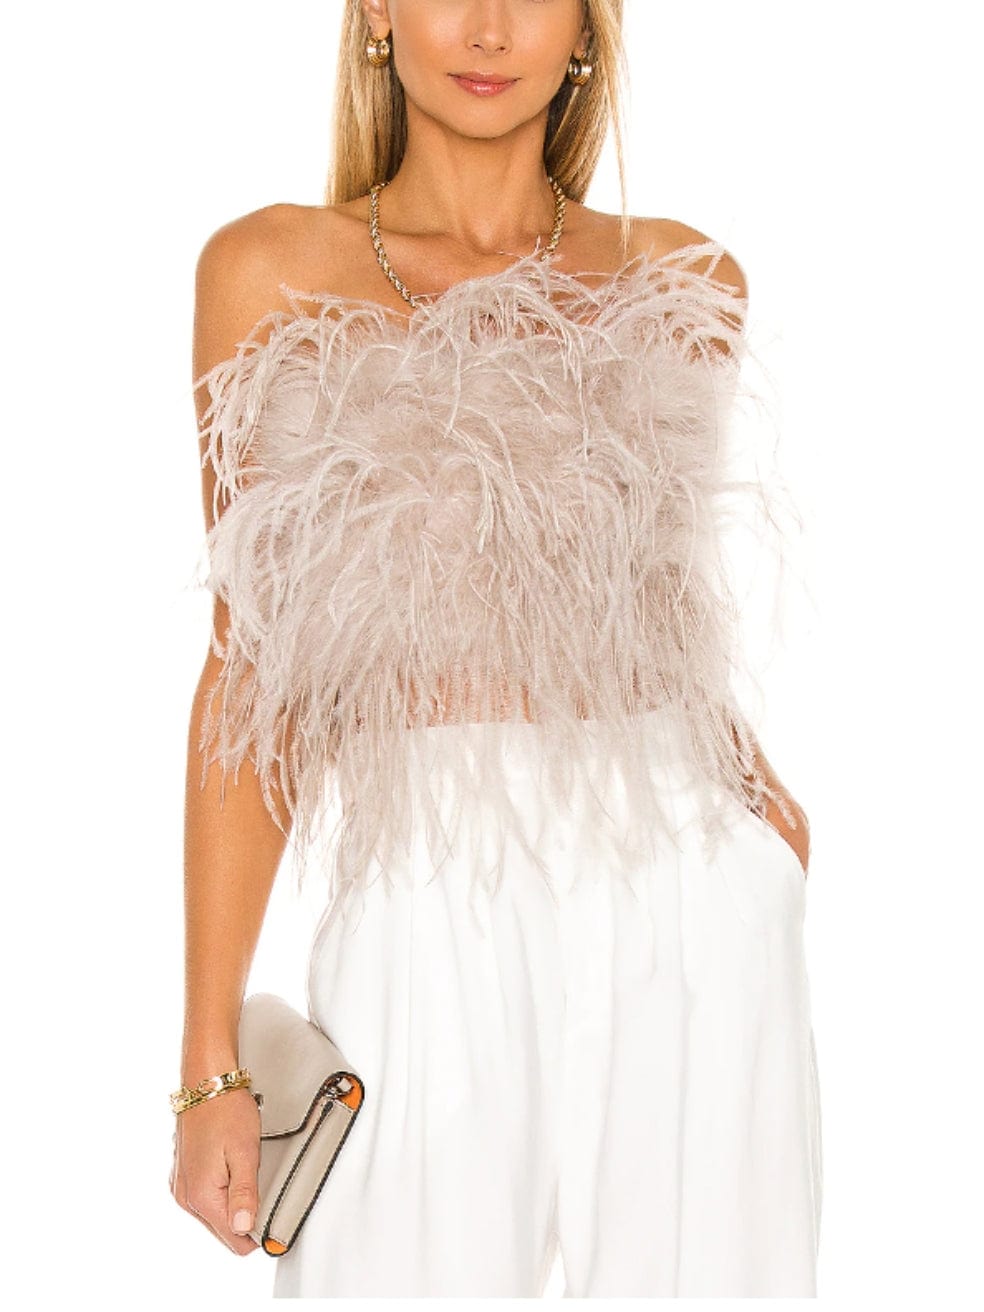 LAMARQUE Zaina Ostrich Feather Bustier Top in Dusty Rose